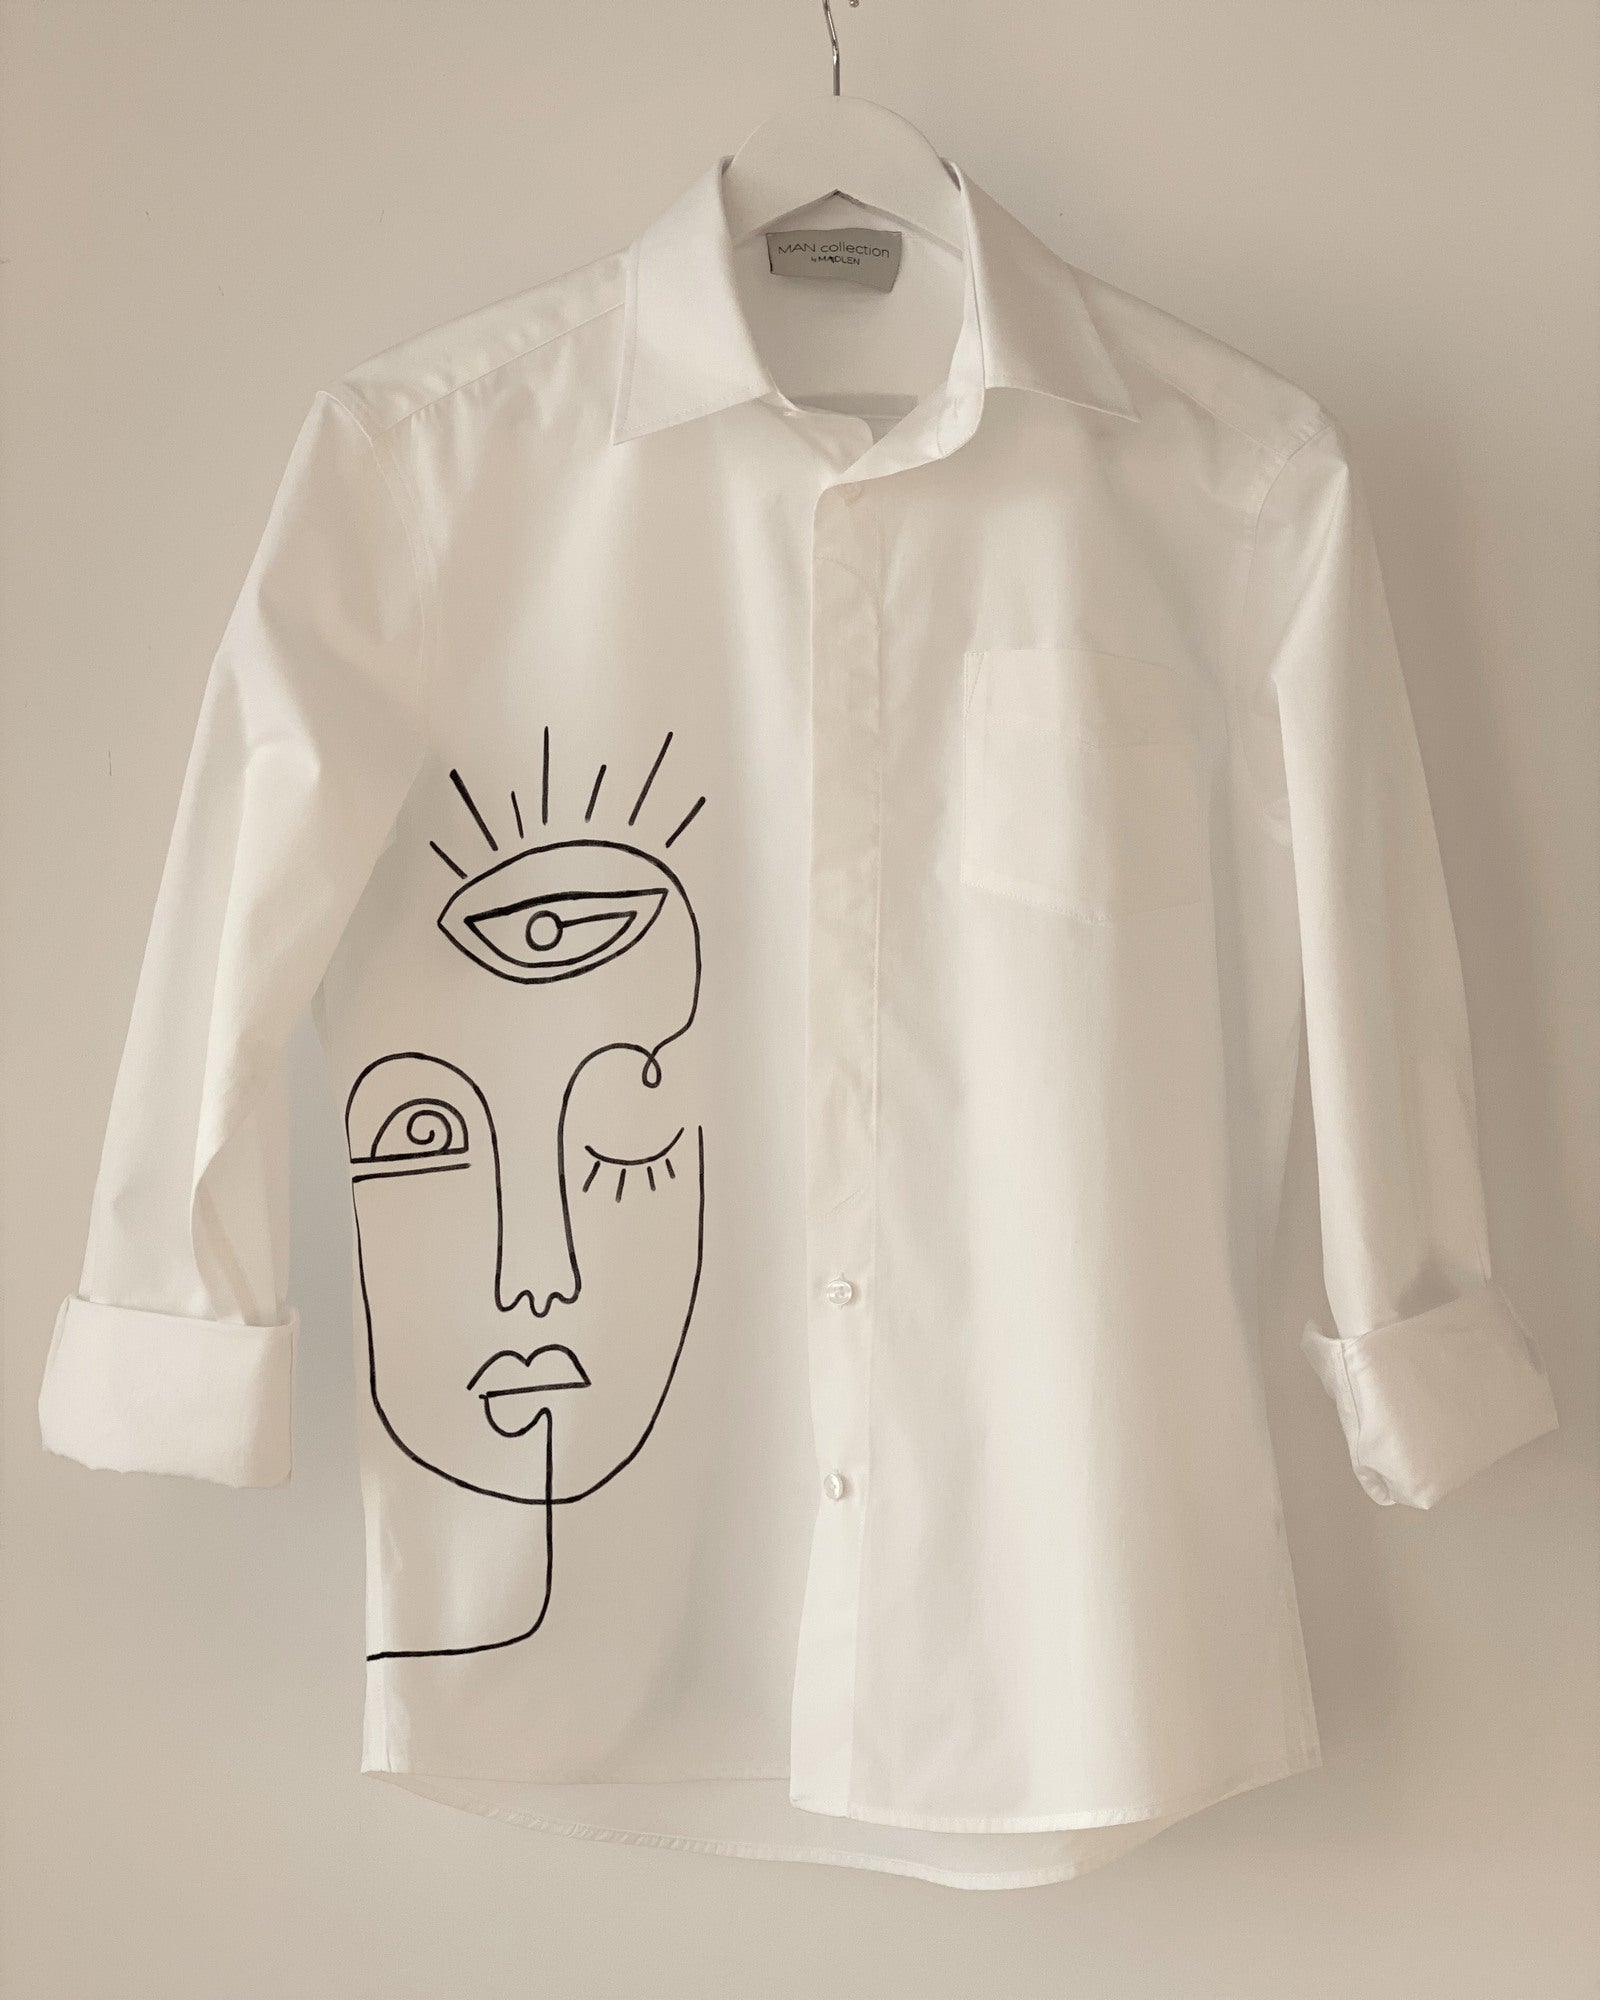 Hand painted men's shirt "Imperfect"